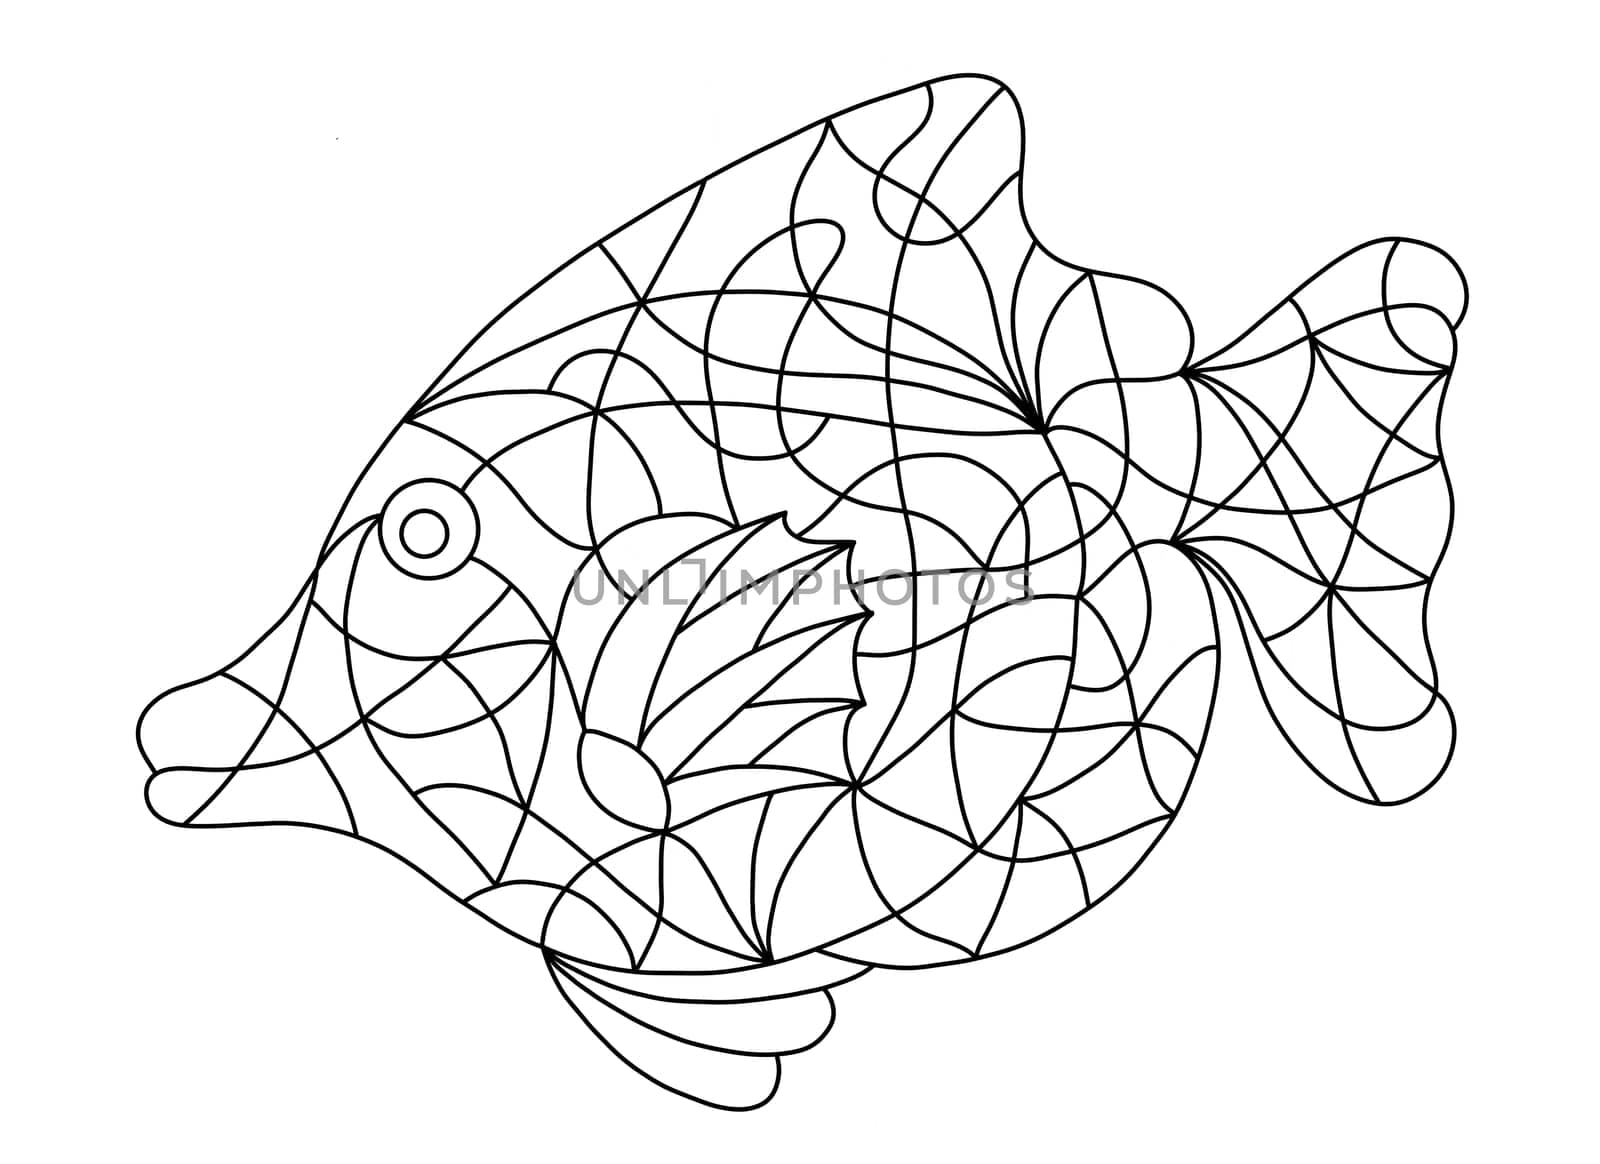 Black and White Fish in Stained Glass Style for Coloring Books Adult, Coloring Pages, Print, Batik and Mosaic Tile Window. by Rina_Dozornaya